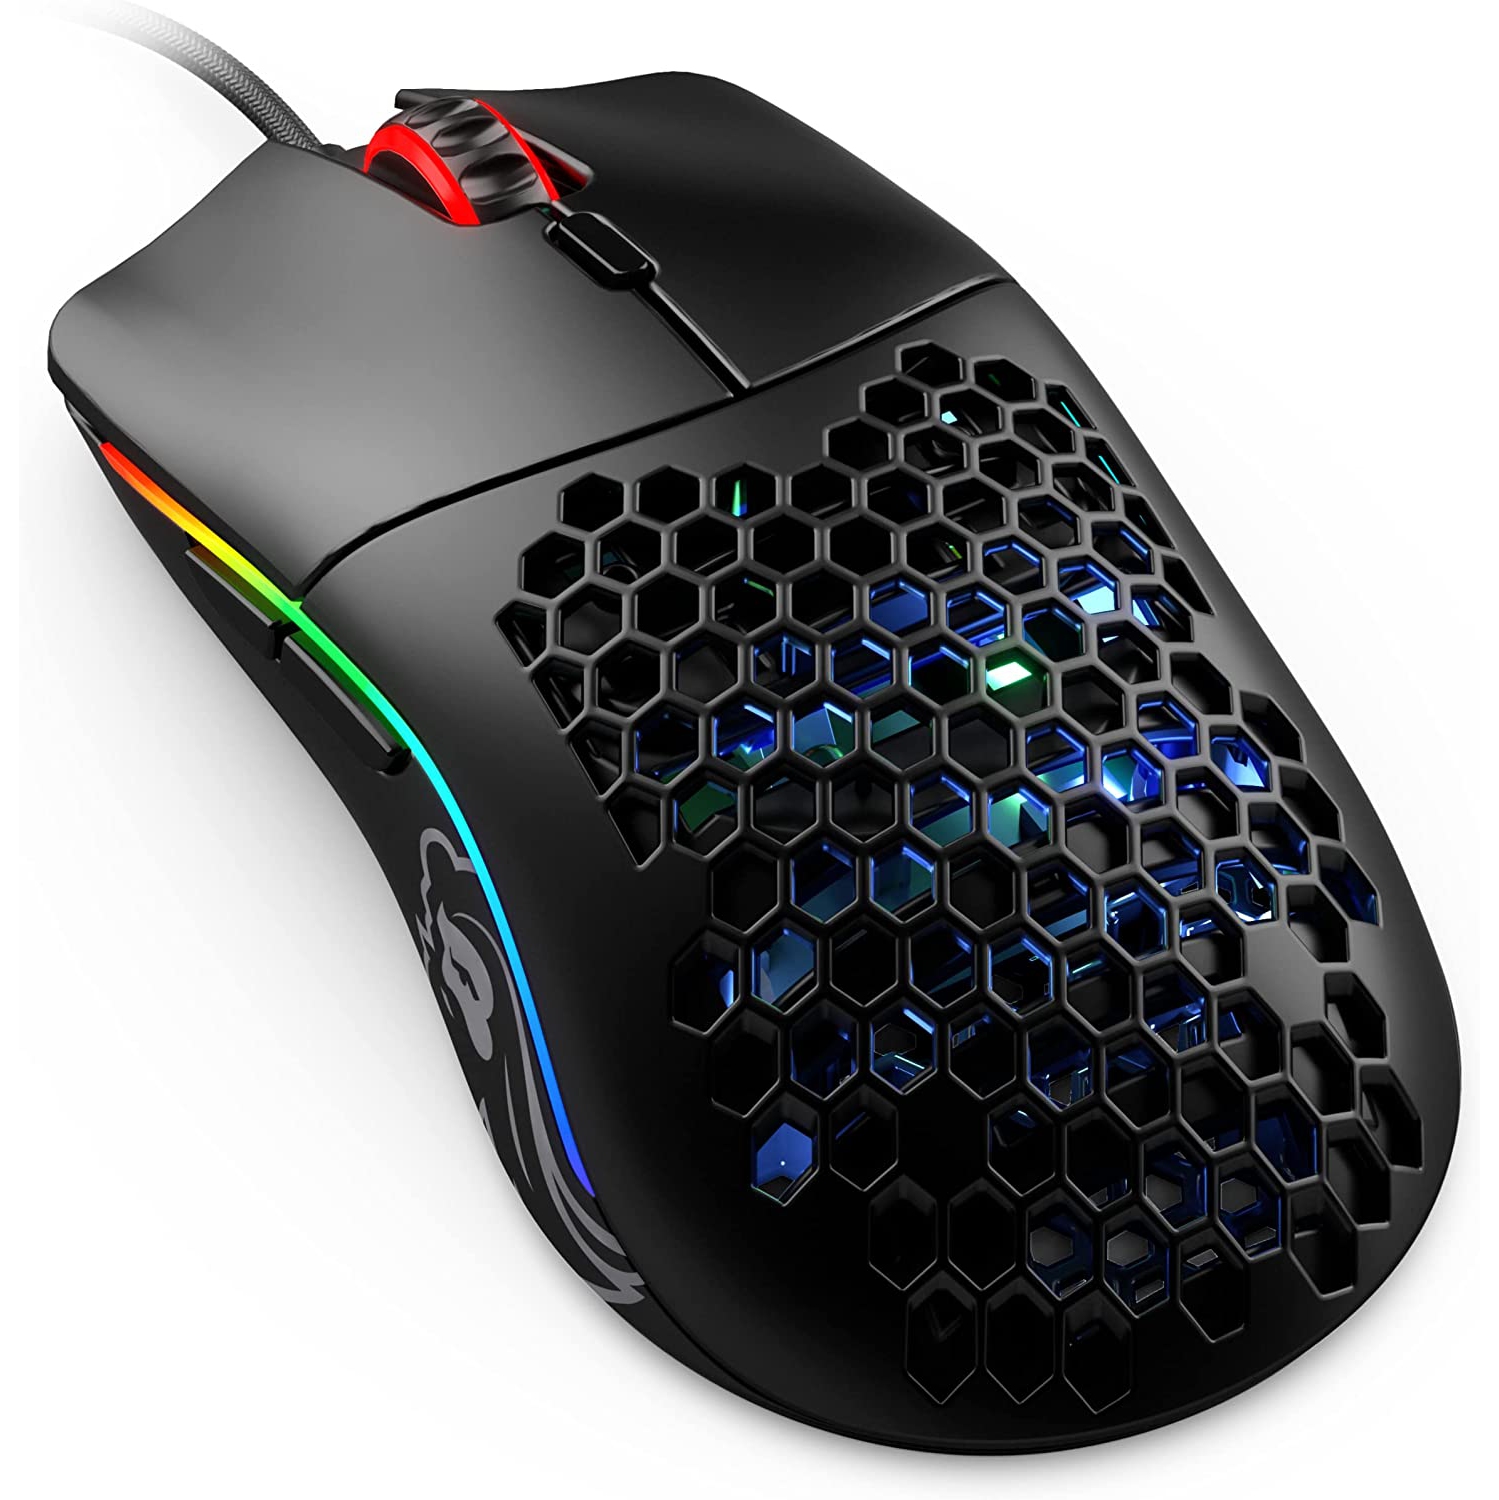 Glorious Gaming Mouse - Model O 67 g Superlight Honeycomb Mouse, Matte Black Mouse, USB Gaming Mouse